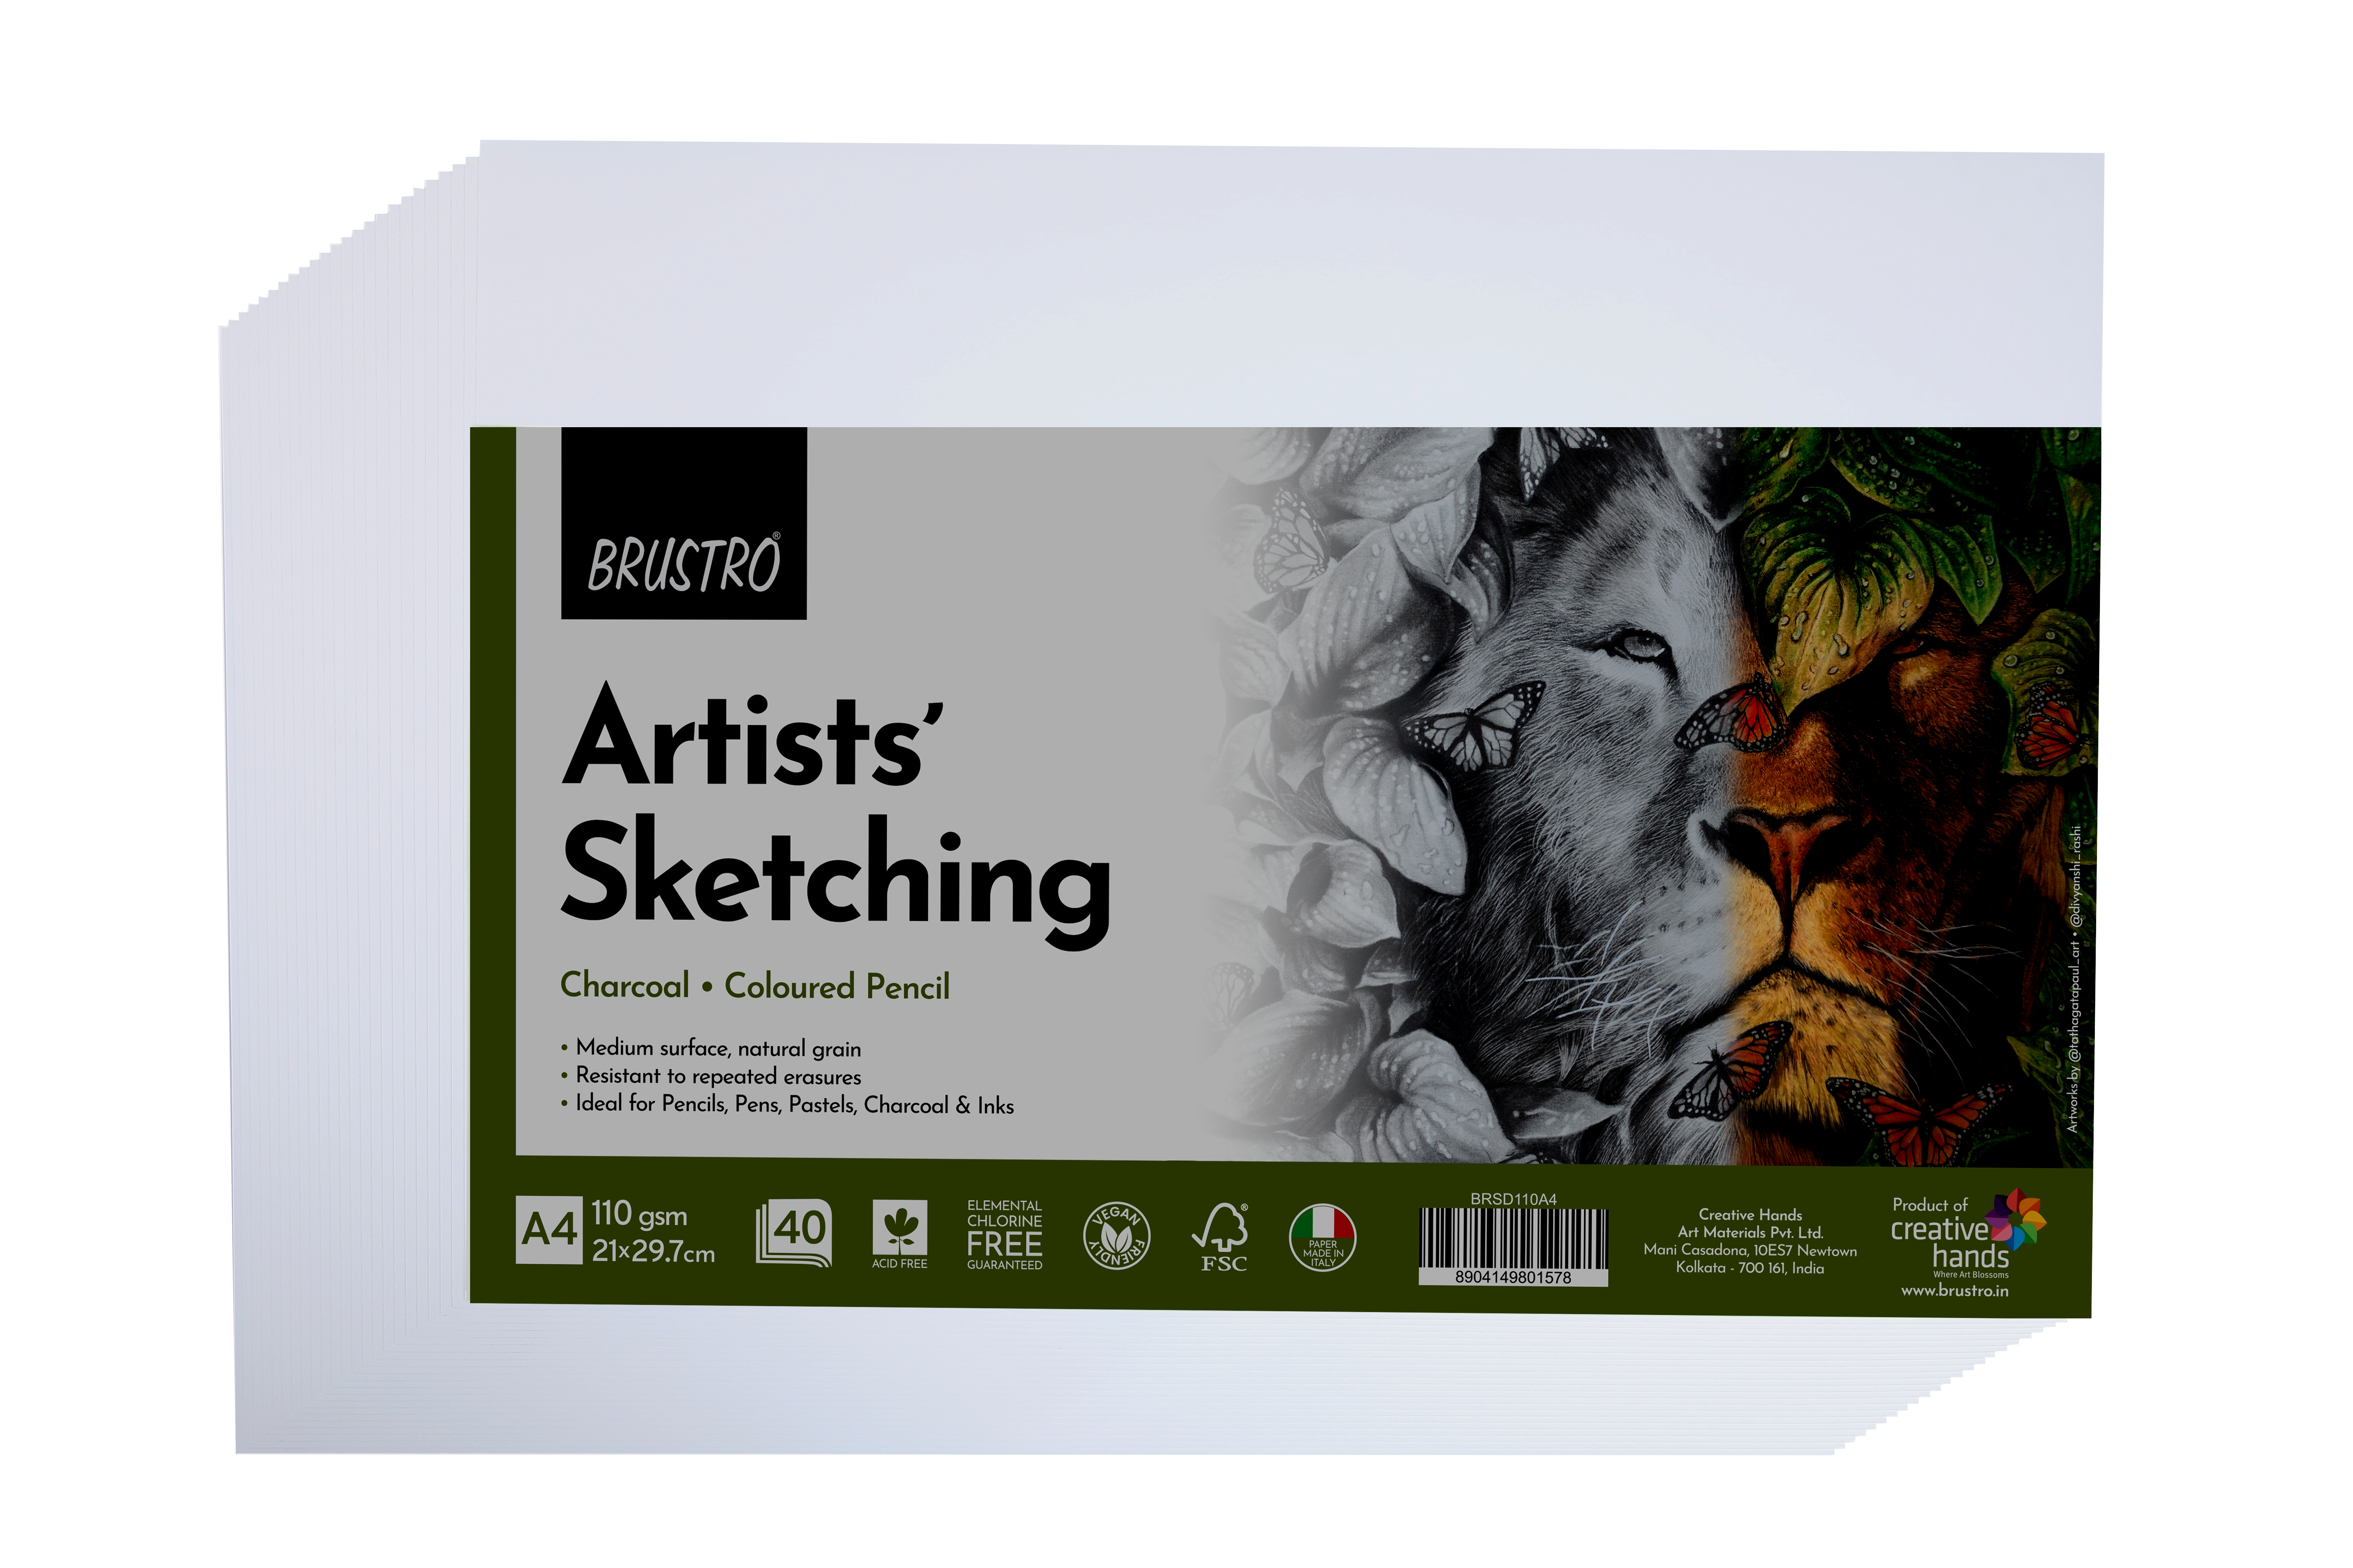 Brustro Artists Drawing & Sketching A4 - SCOOBOO - BRUSTRO